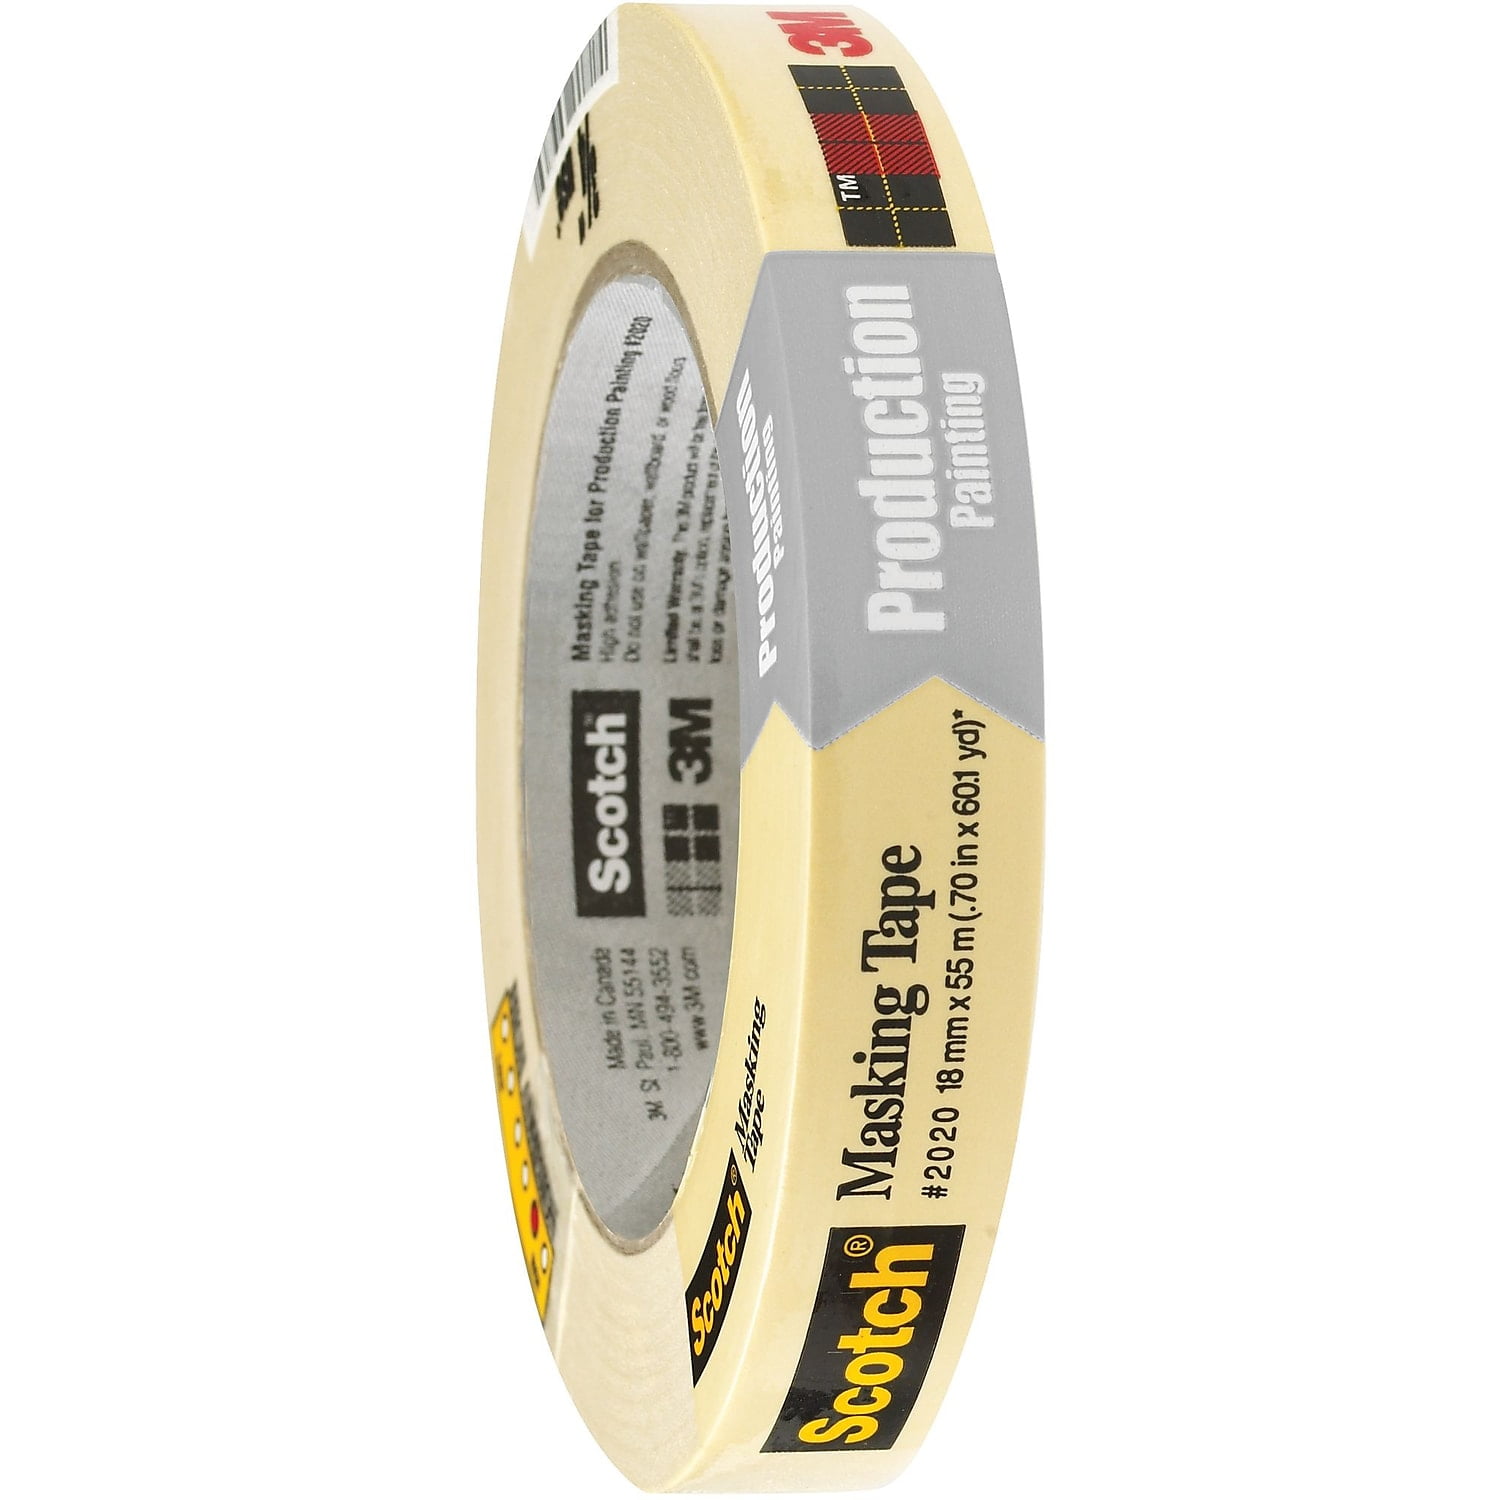 Scotch T934202012pk 0.75 In. X 60 Yards 2020 Masking Tape, Natural - Pack Of 12